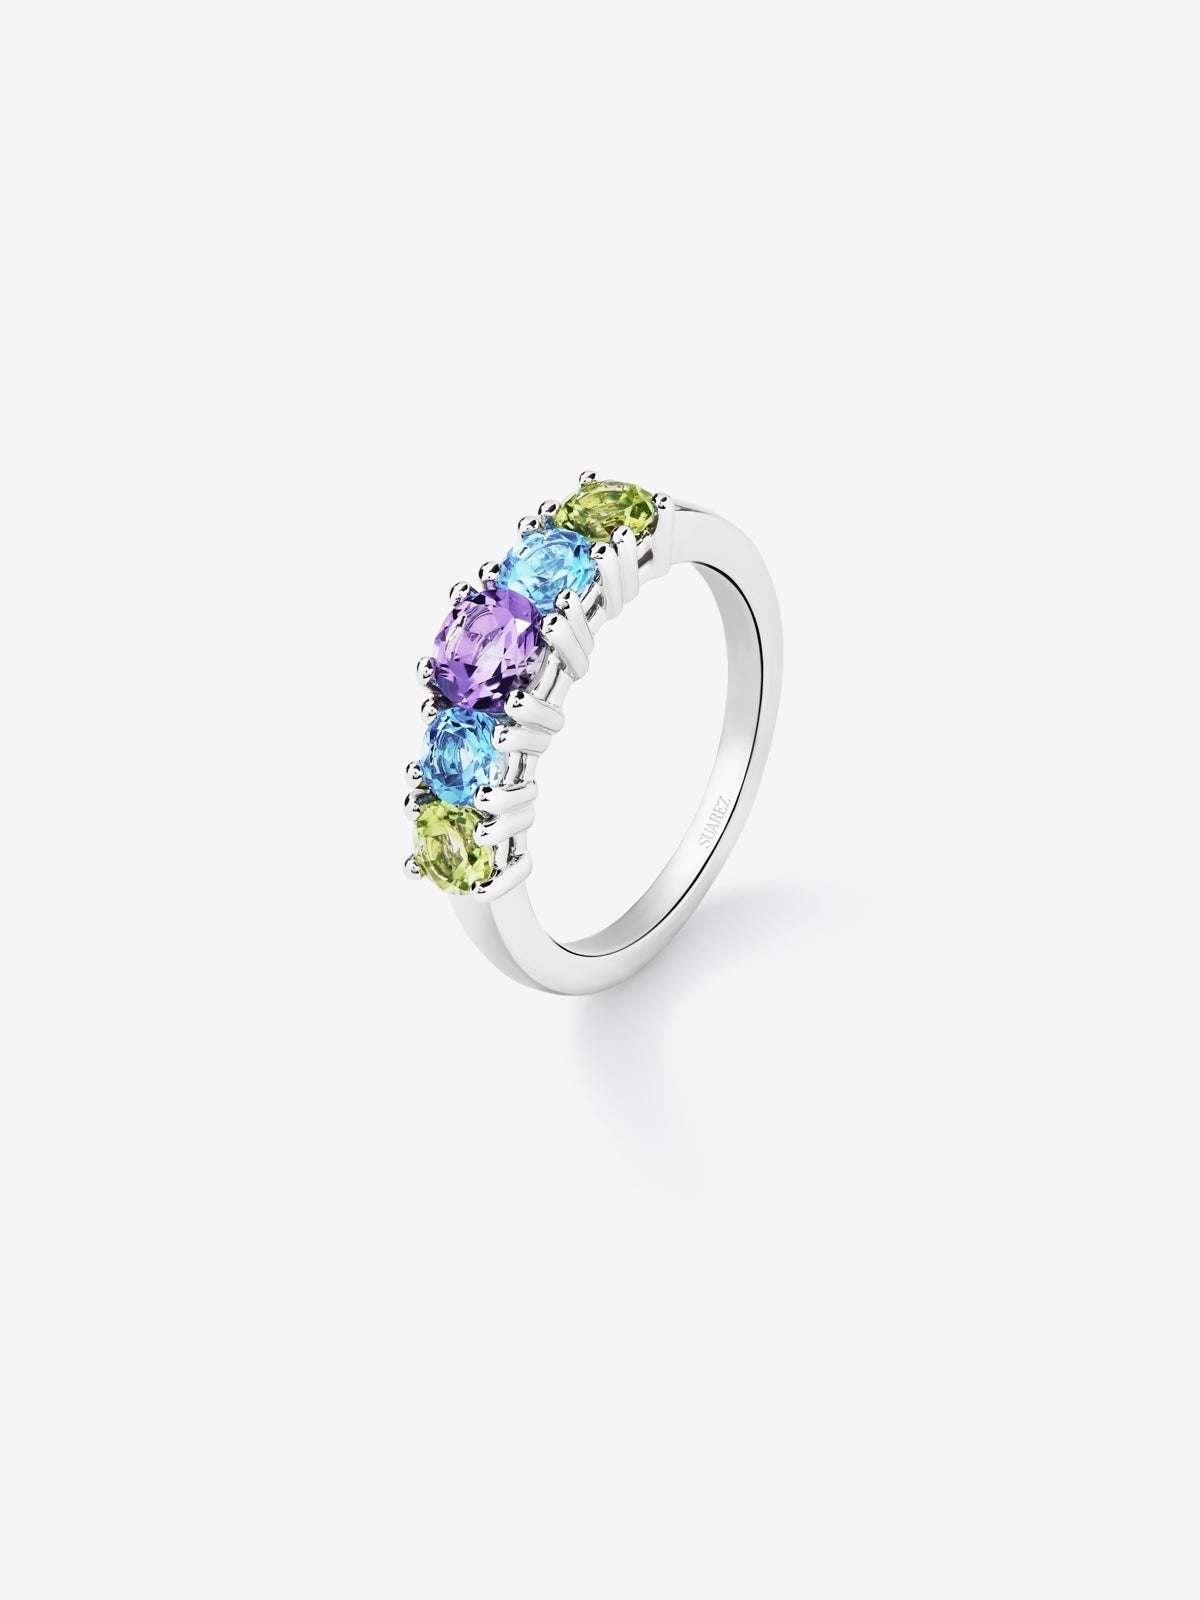 925 silver cinquillo ring with 2 peridots, a purple amethyst, and brilliant-cut Swiss blue topazes